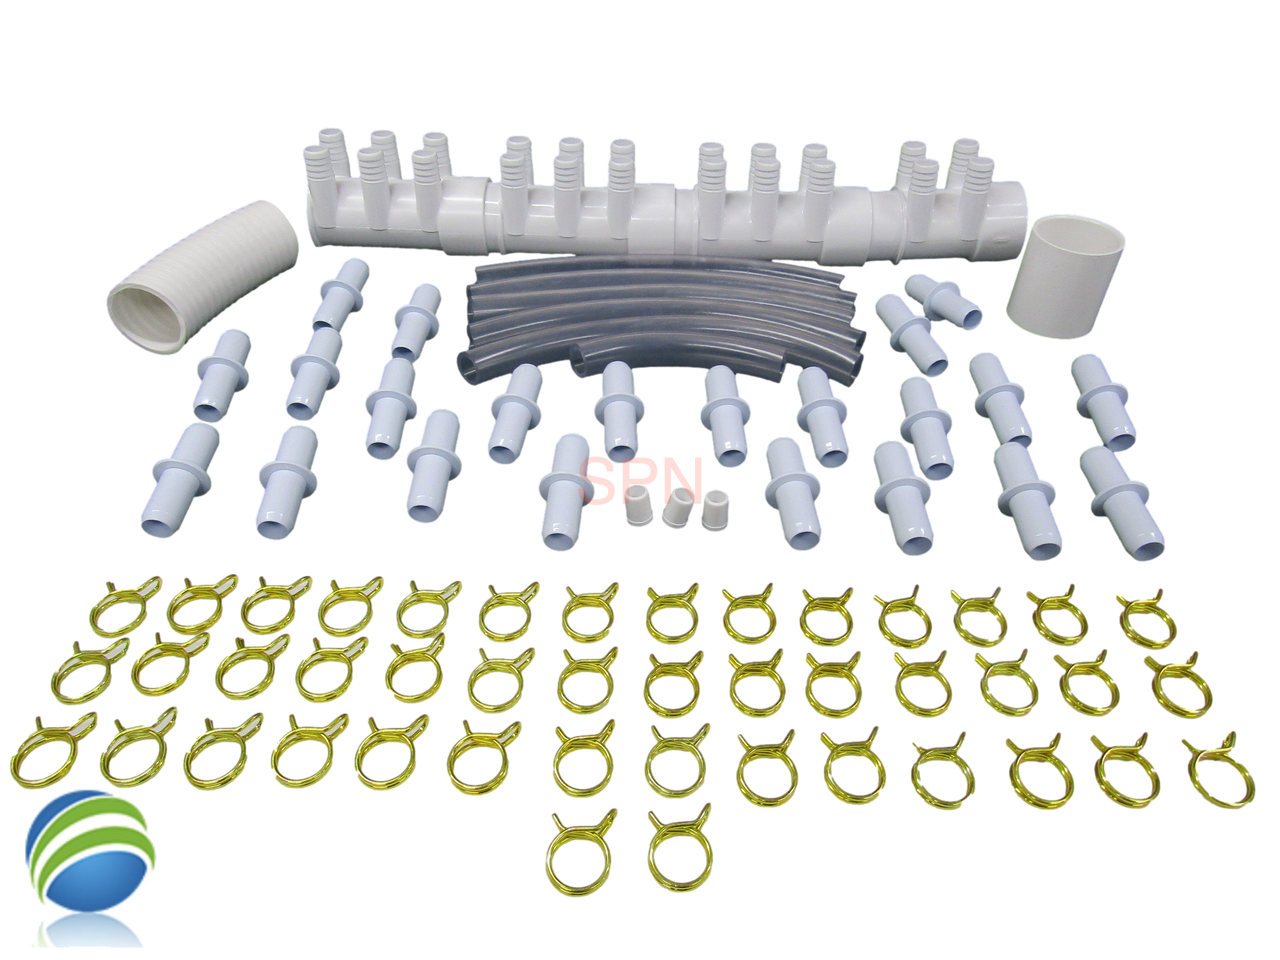 Manifold Hot Tub Spa Dead End (22) 3/4" Outlets with Coupler Kit Video How To